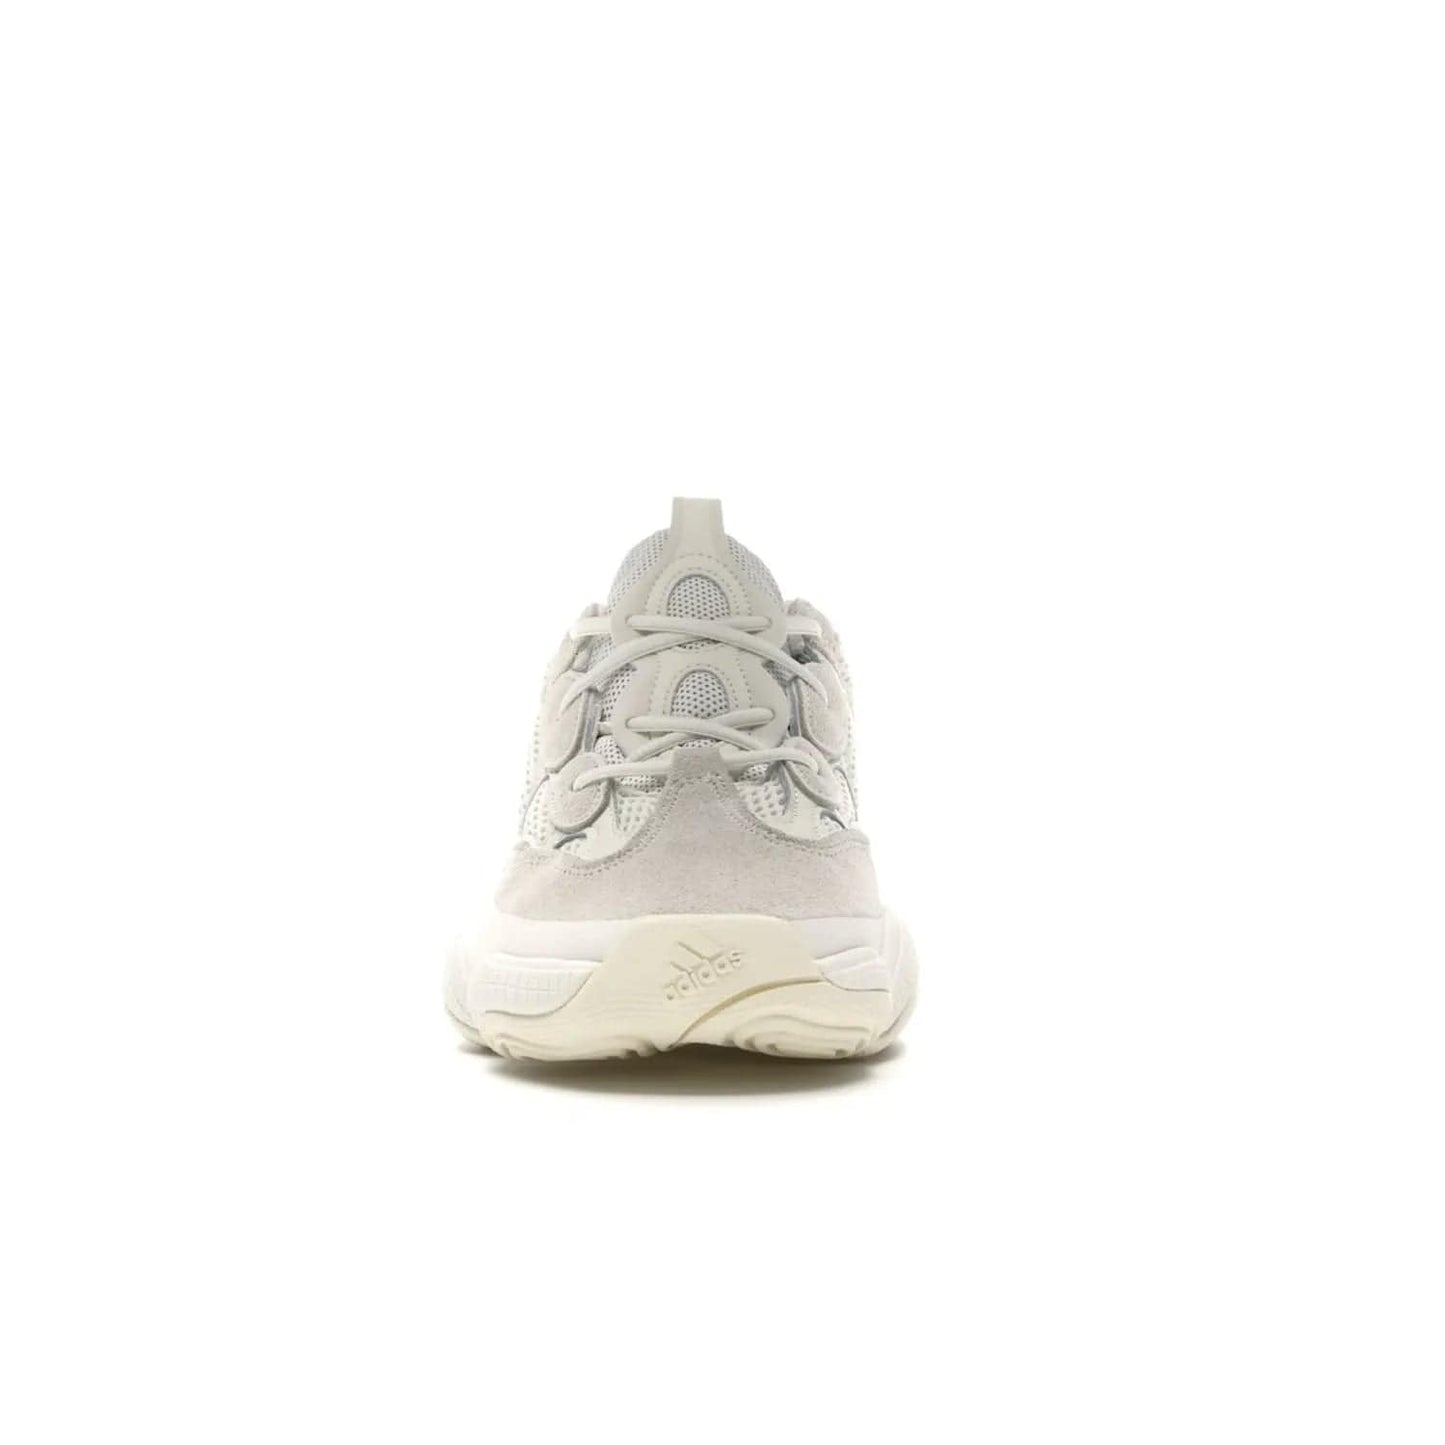 adidas Yeezy 500 Bone White - Image 10 - Only at www.BallersClubKickz.com - Classic look perfect for any sneaker collection. The adidas Yeezy 500 "Bone White" blends a white mesh upper with suede overlays & a chunky midsole inspired by the Adidas KB3. Complimented by a tonal-cream outsole, this timeless style is a must-have.